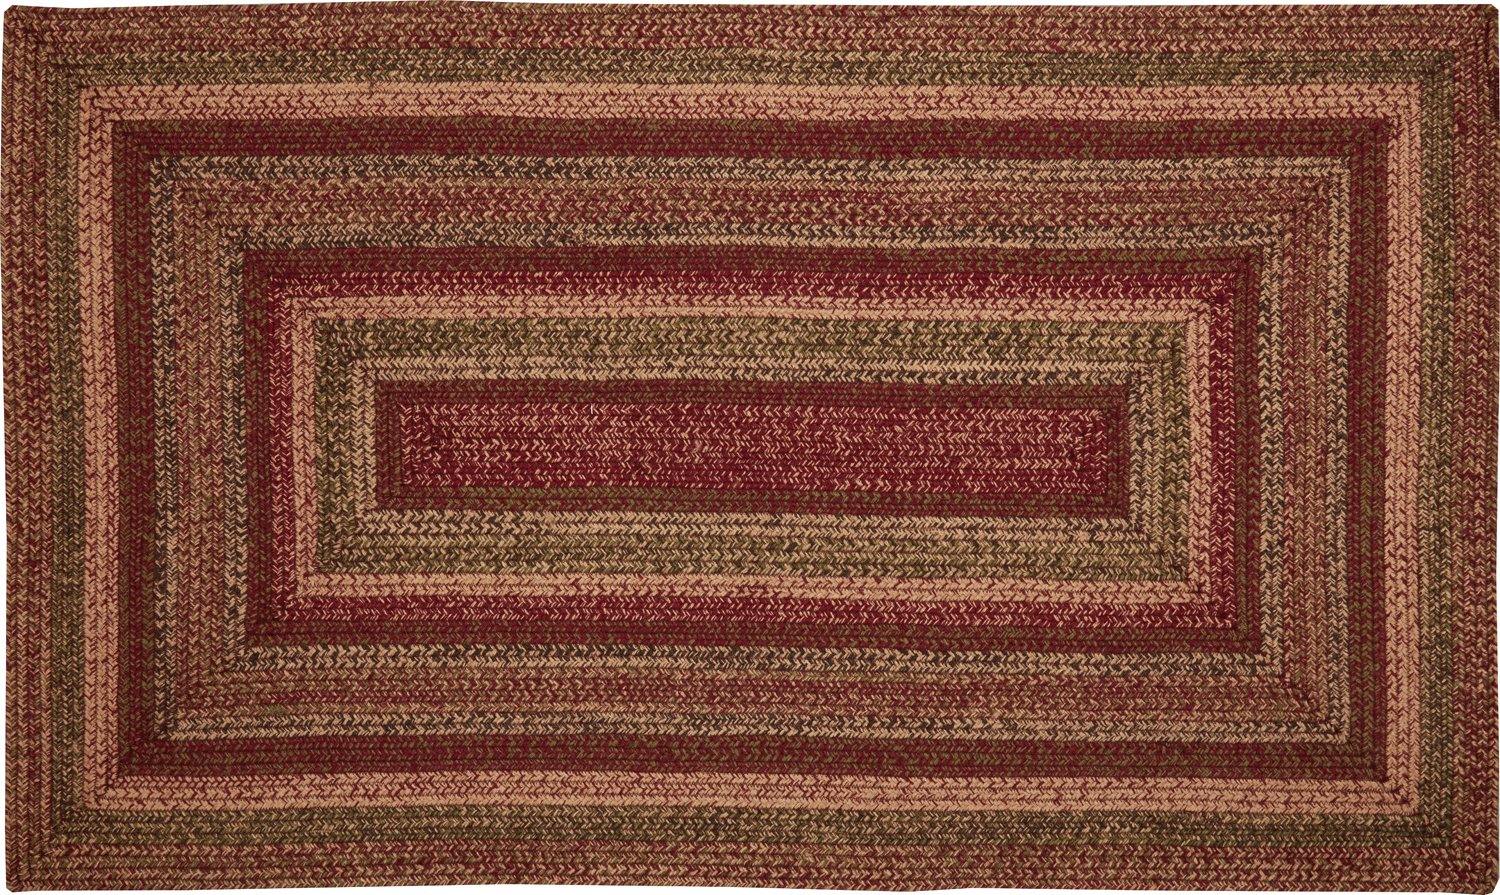 Cider Mill Jute Braided Rug Rect 3'x5' with Rug Pad VHC Brands - The Fox Decor